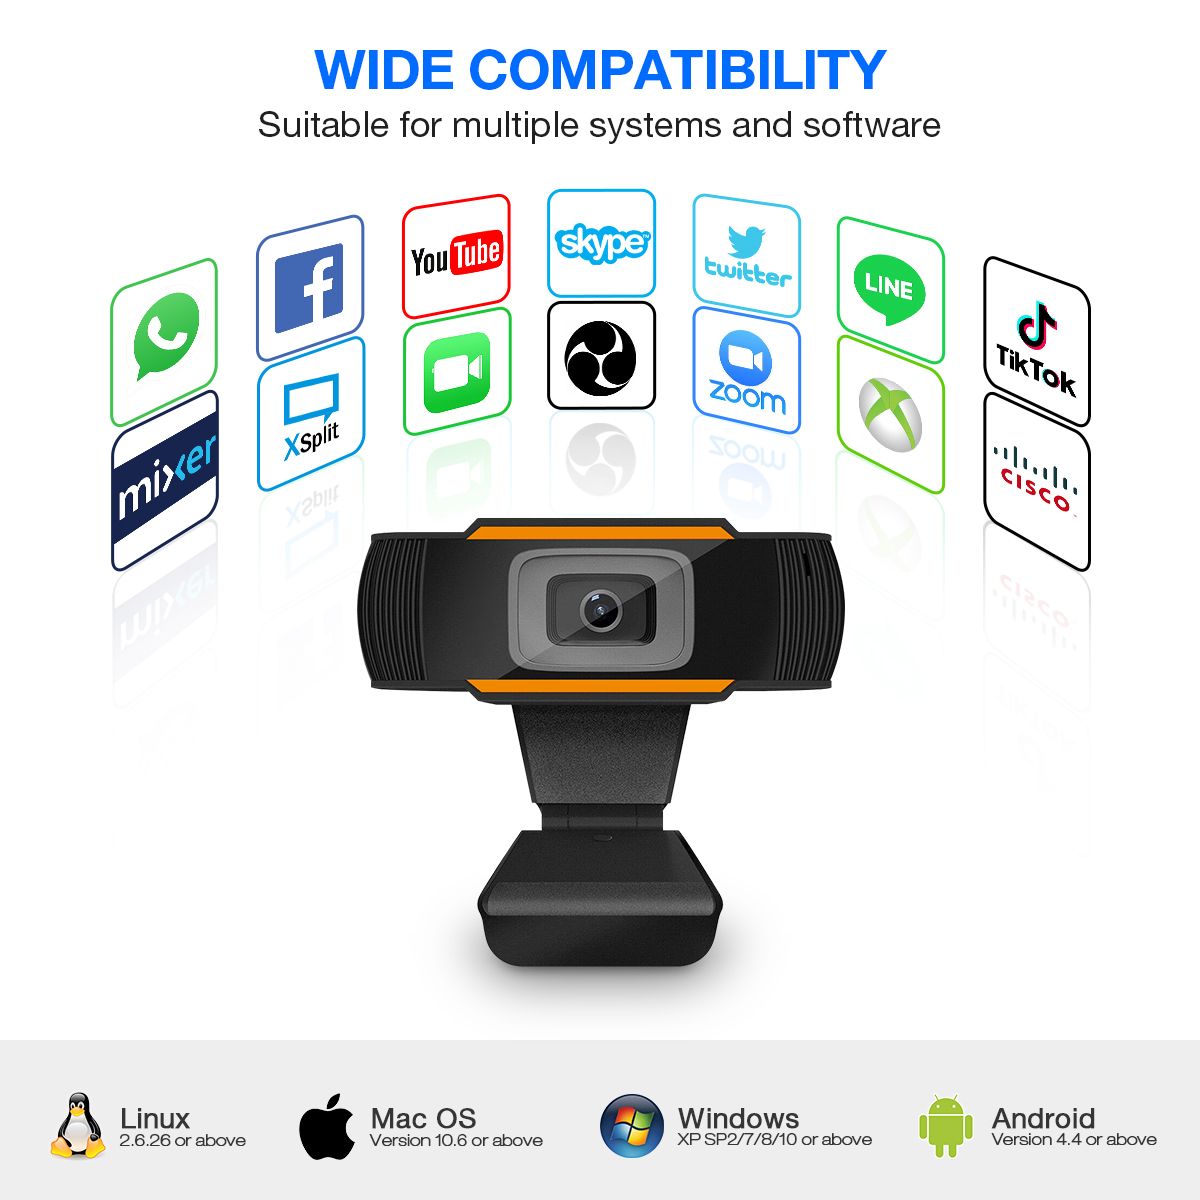 720P-HD-Free-Drive-USB-Webcam-Automatic-Dimming-Conference-Live-Computer-Camera-Built-in-Noise-Reduc-1673830